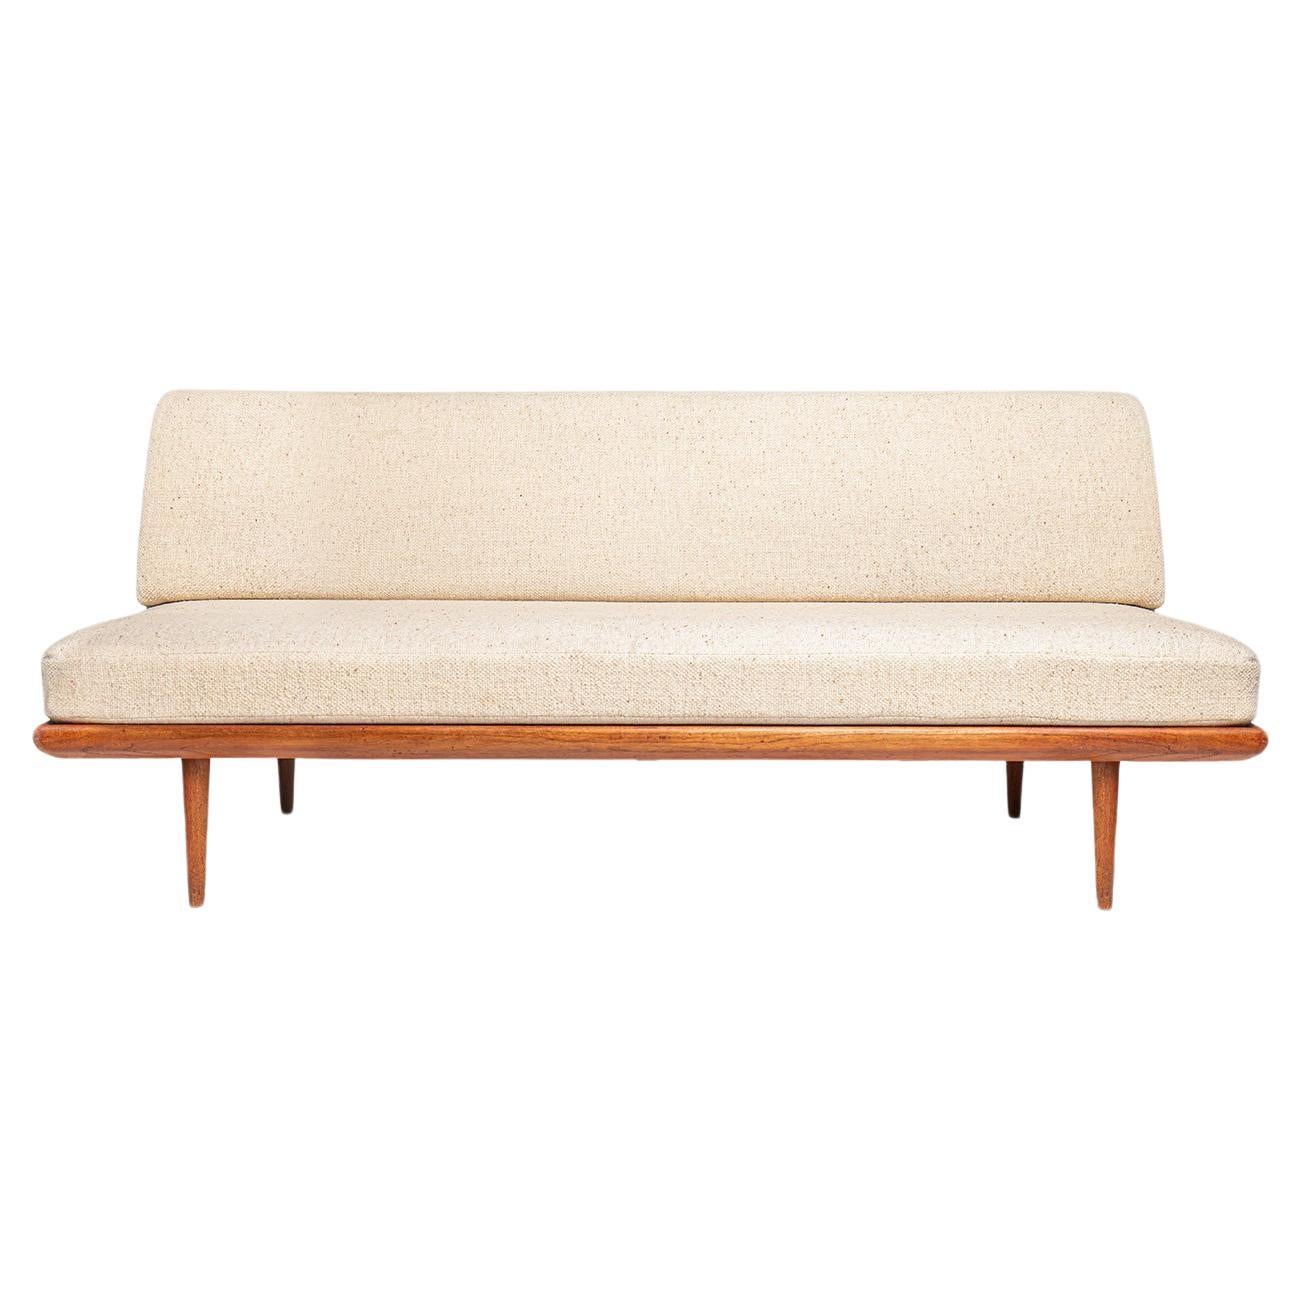 Minerva Daybed or Sofa Model 417 Manufactured by France & Søn